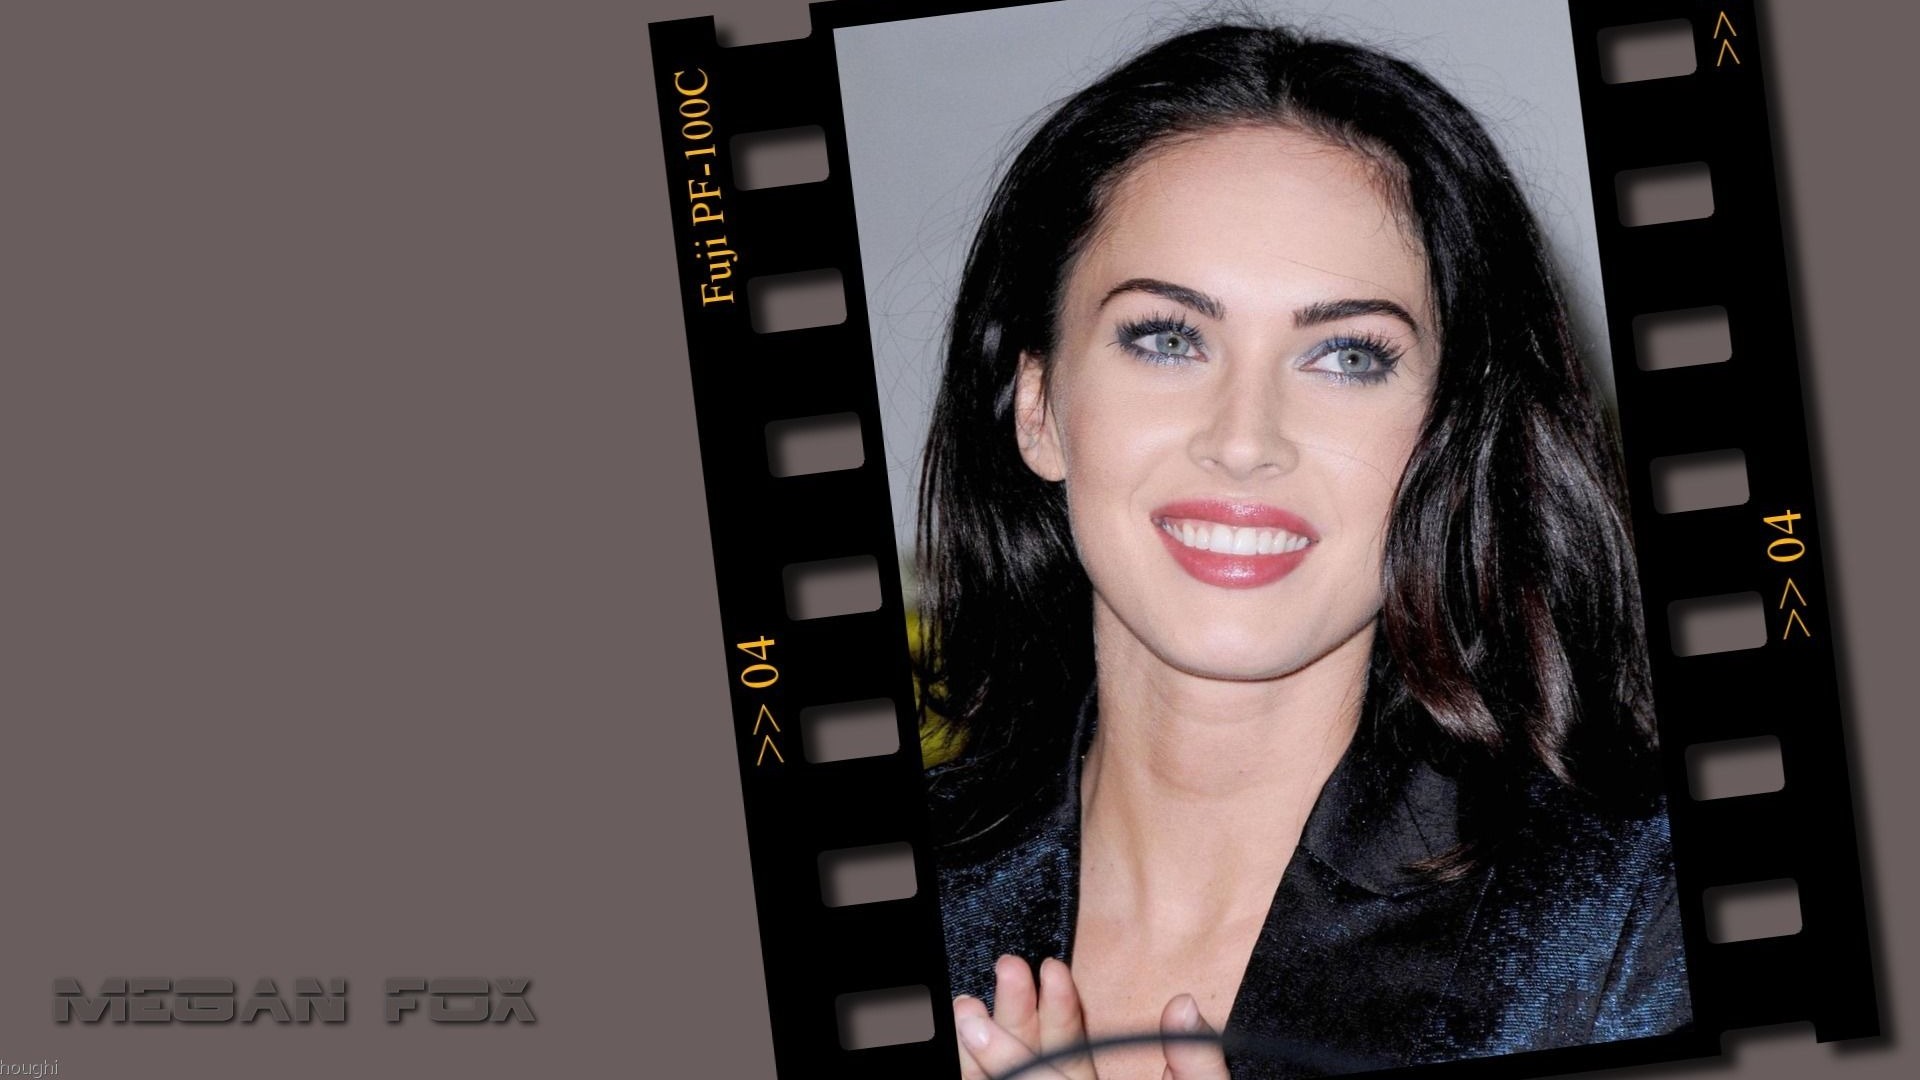 Megan Fox #052 - 1920x1080 Wallpapers Pictures Photos Images